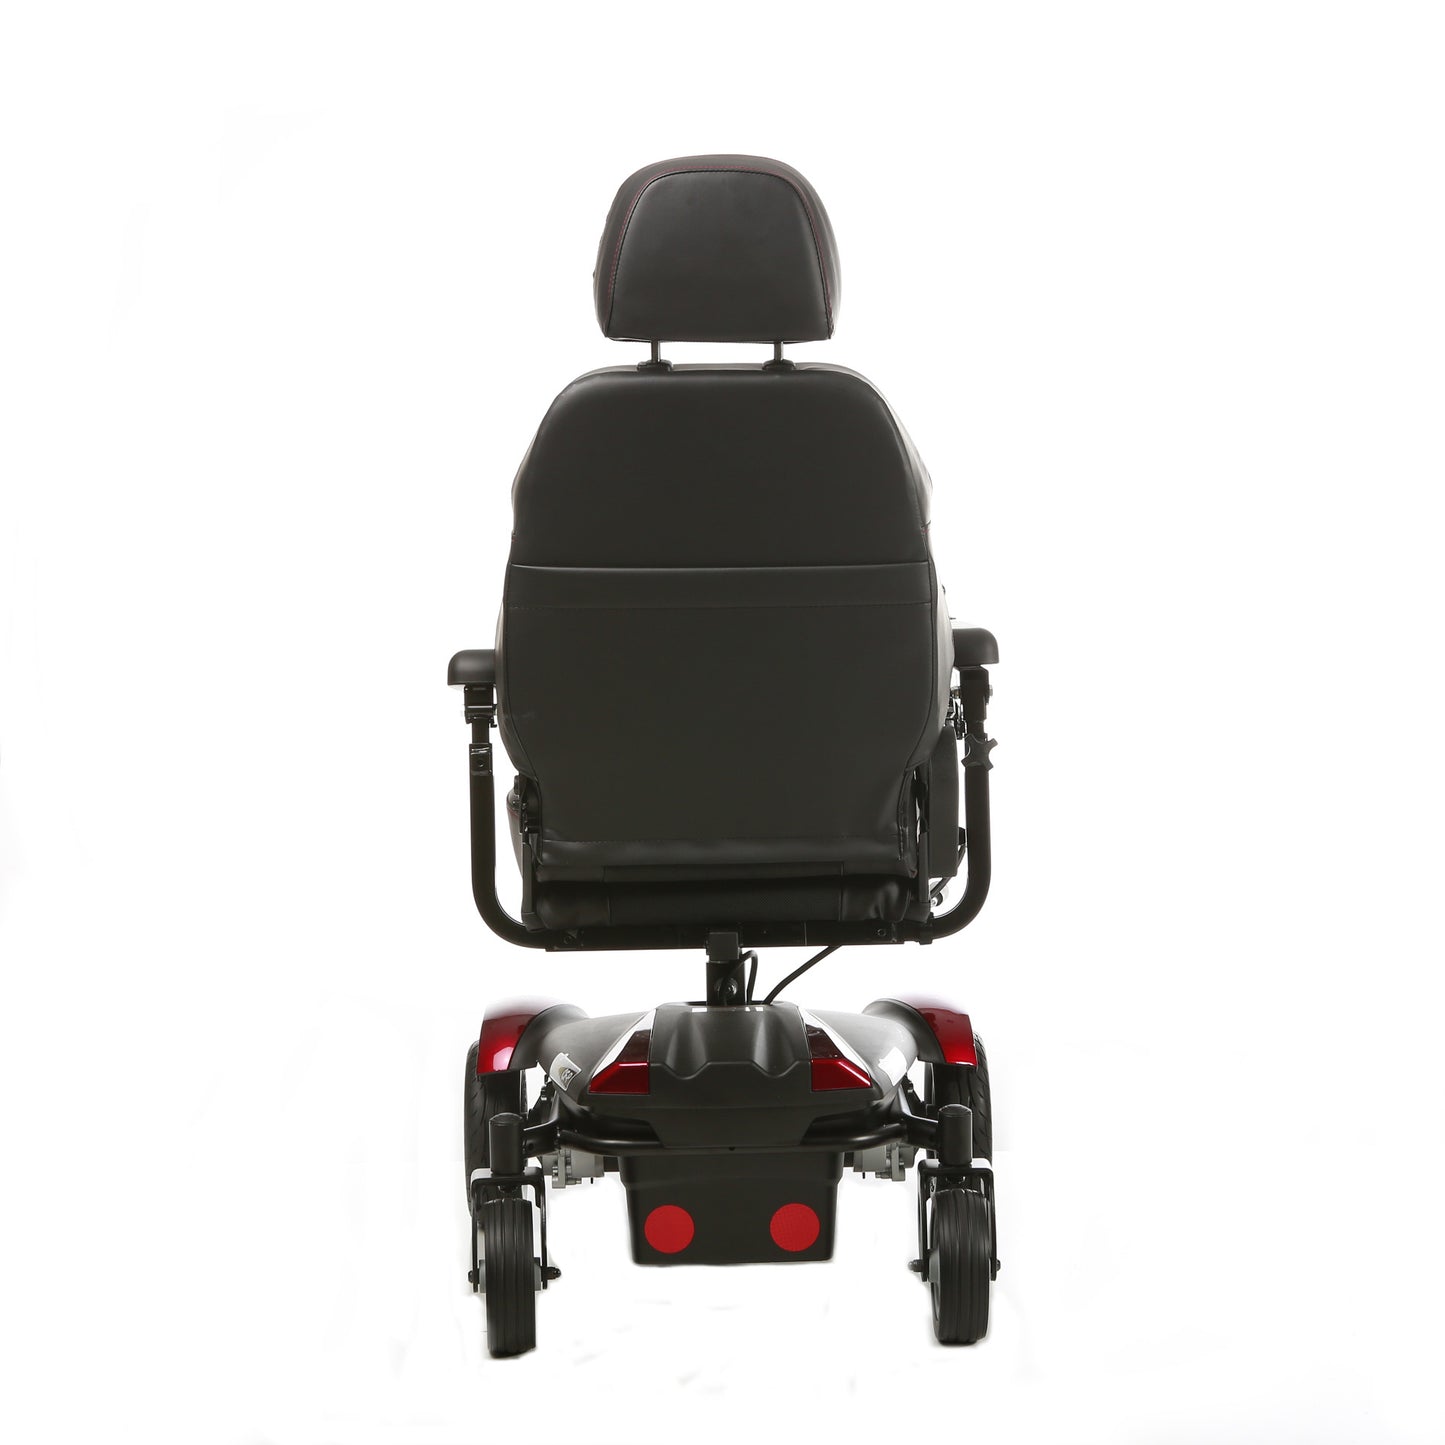 Merits P322 Vision CF Power Wheelchair - Breaks Down For Travel/Portable, w/ Anti Flat Tires, 300 Lbs Weight Capacity